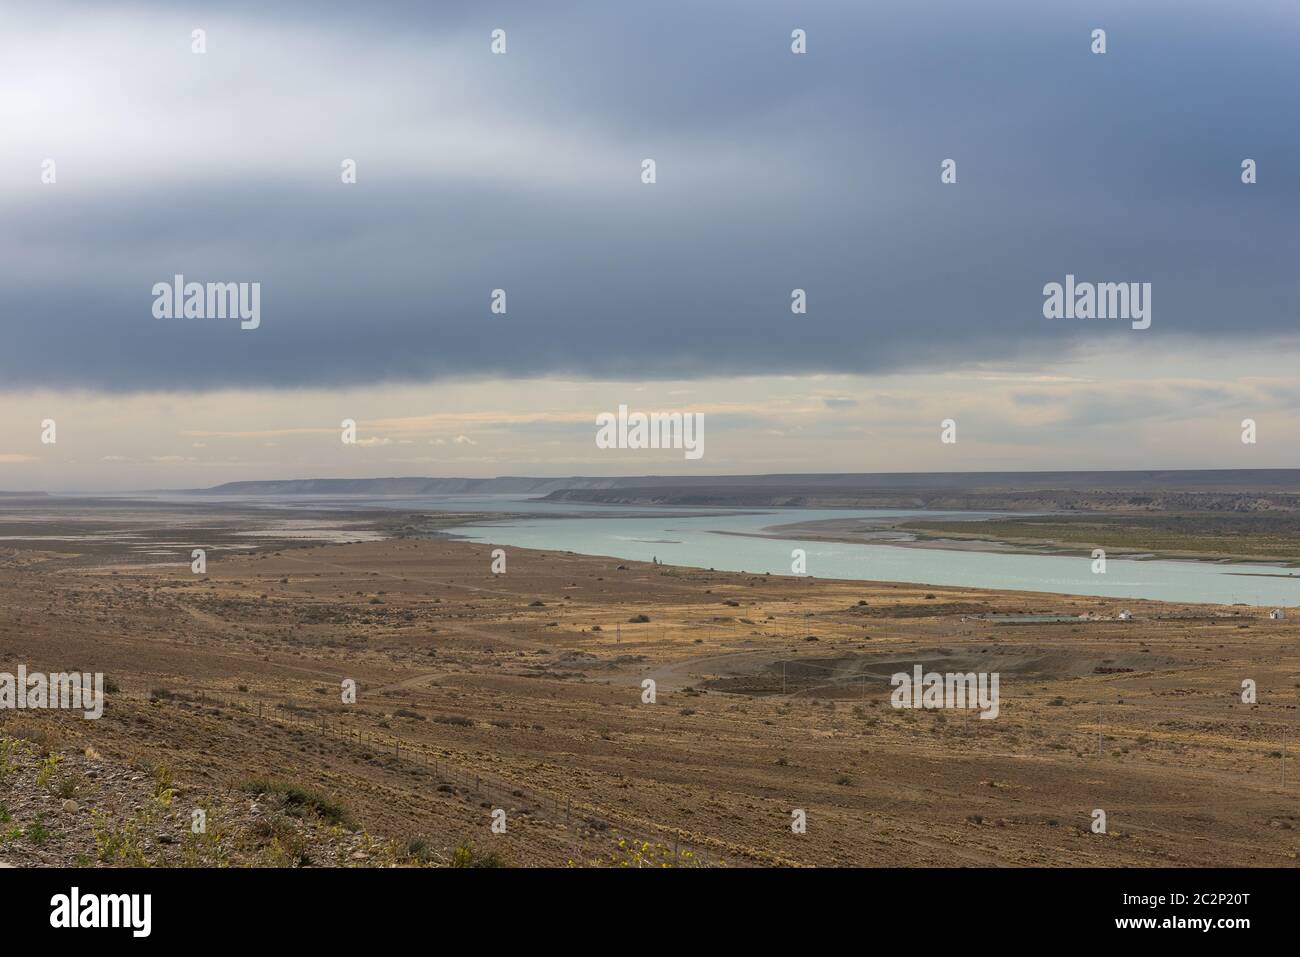 Steppe landscape in the province of Chubut, Argentina Stock Photo